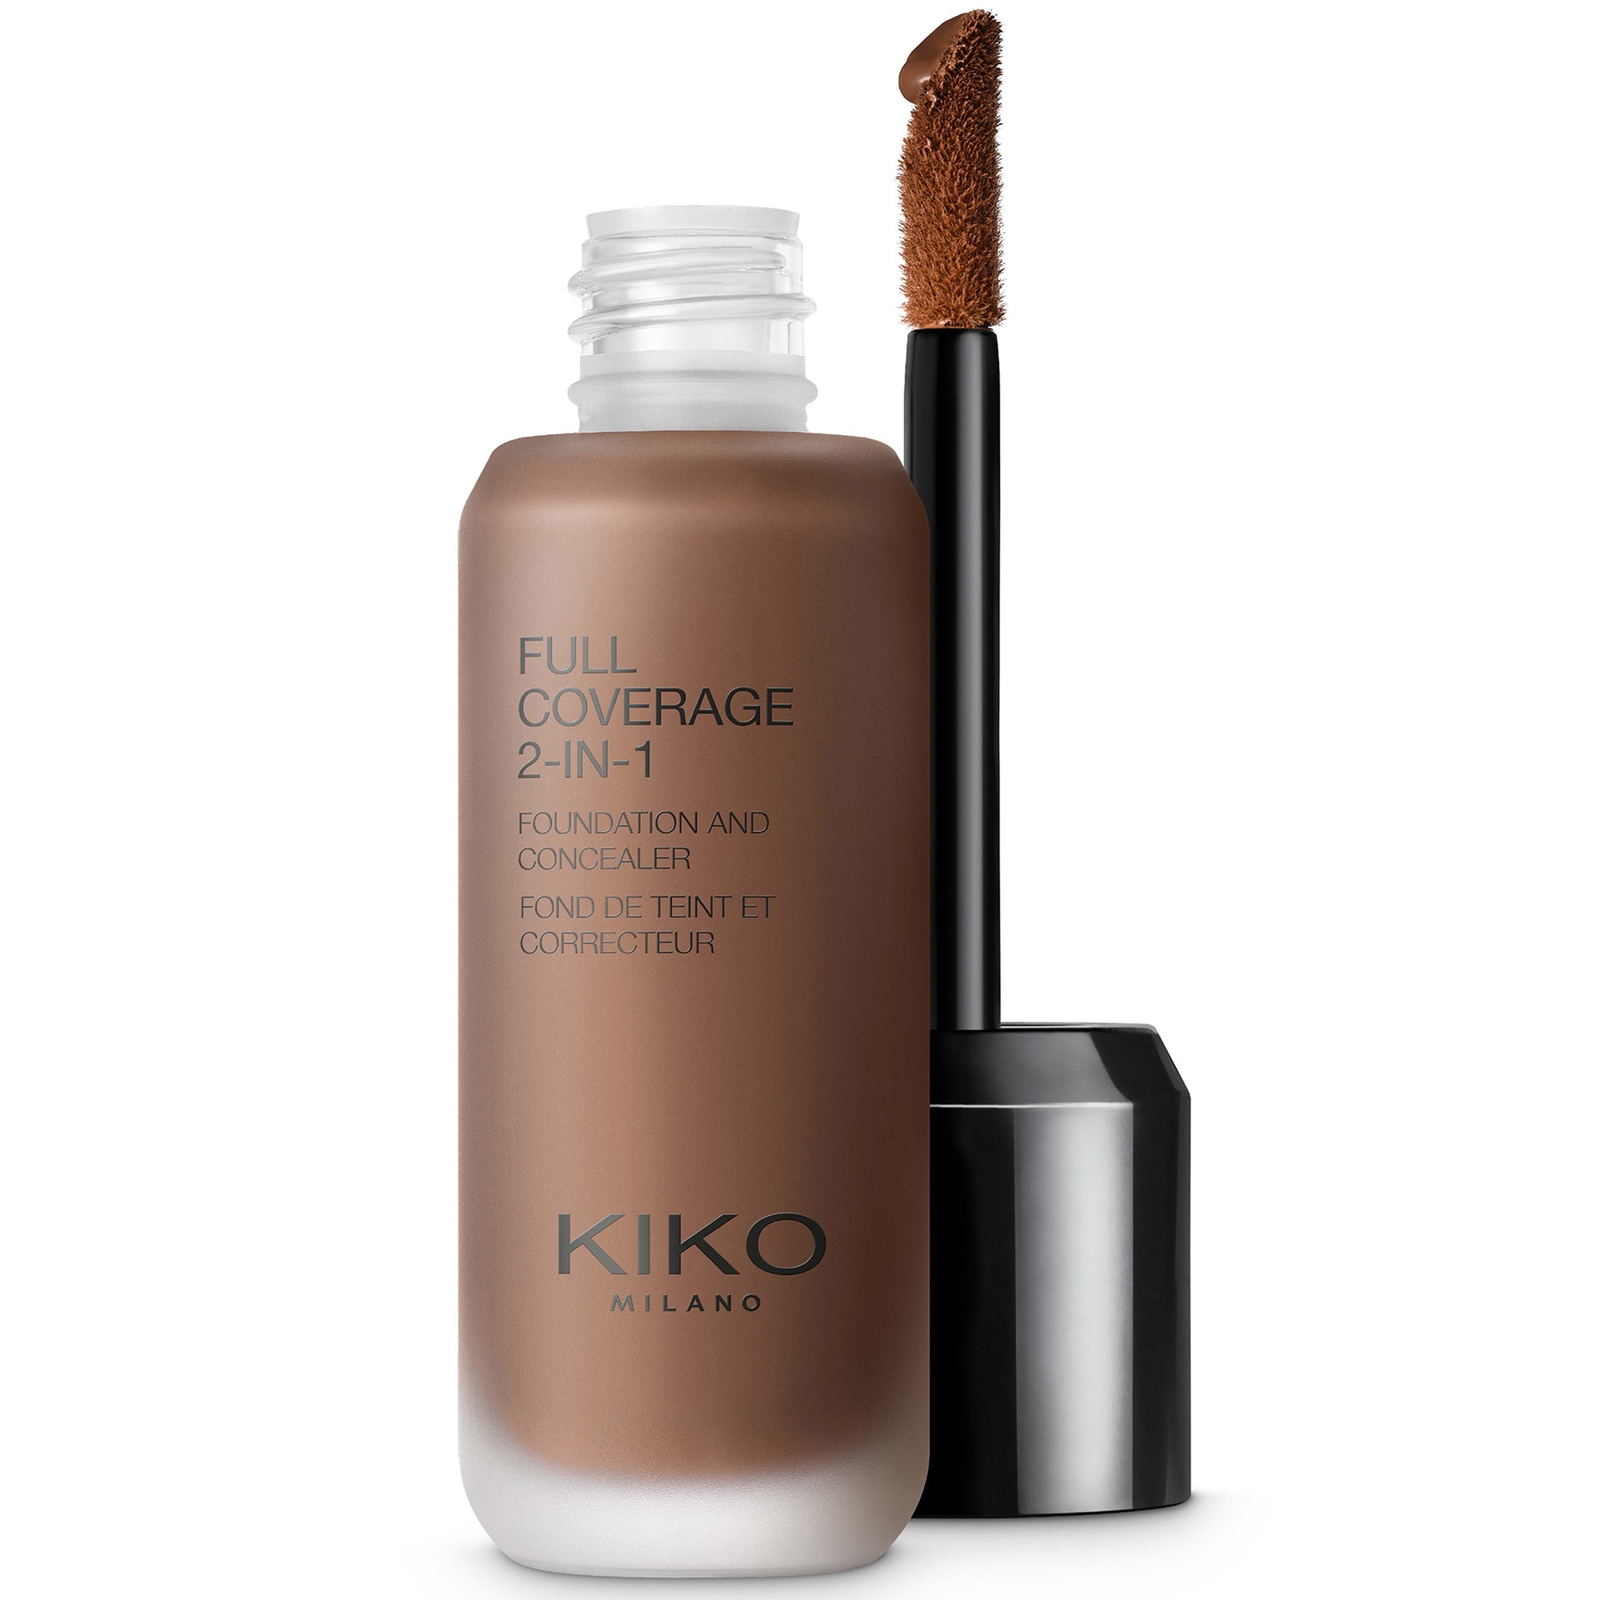 Image of KIKO Milano Full Coverage 2-in-1 Foundation and Concealer 25ml (Various Shades) - 200 Neutral